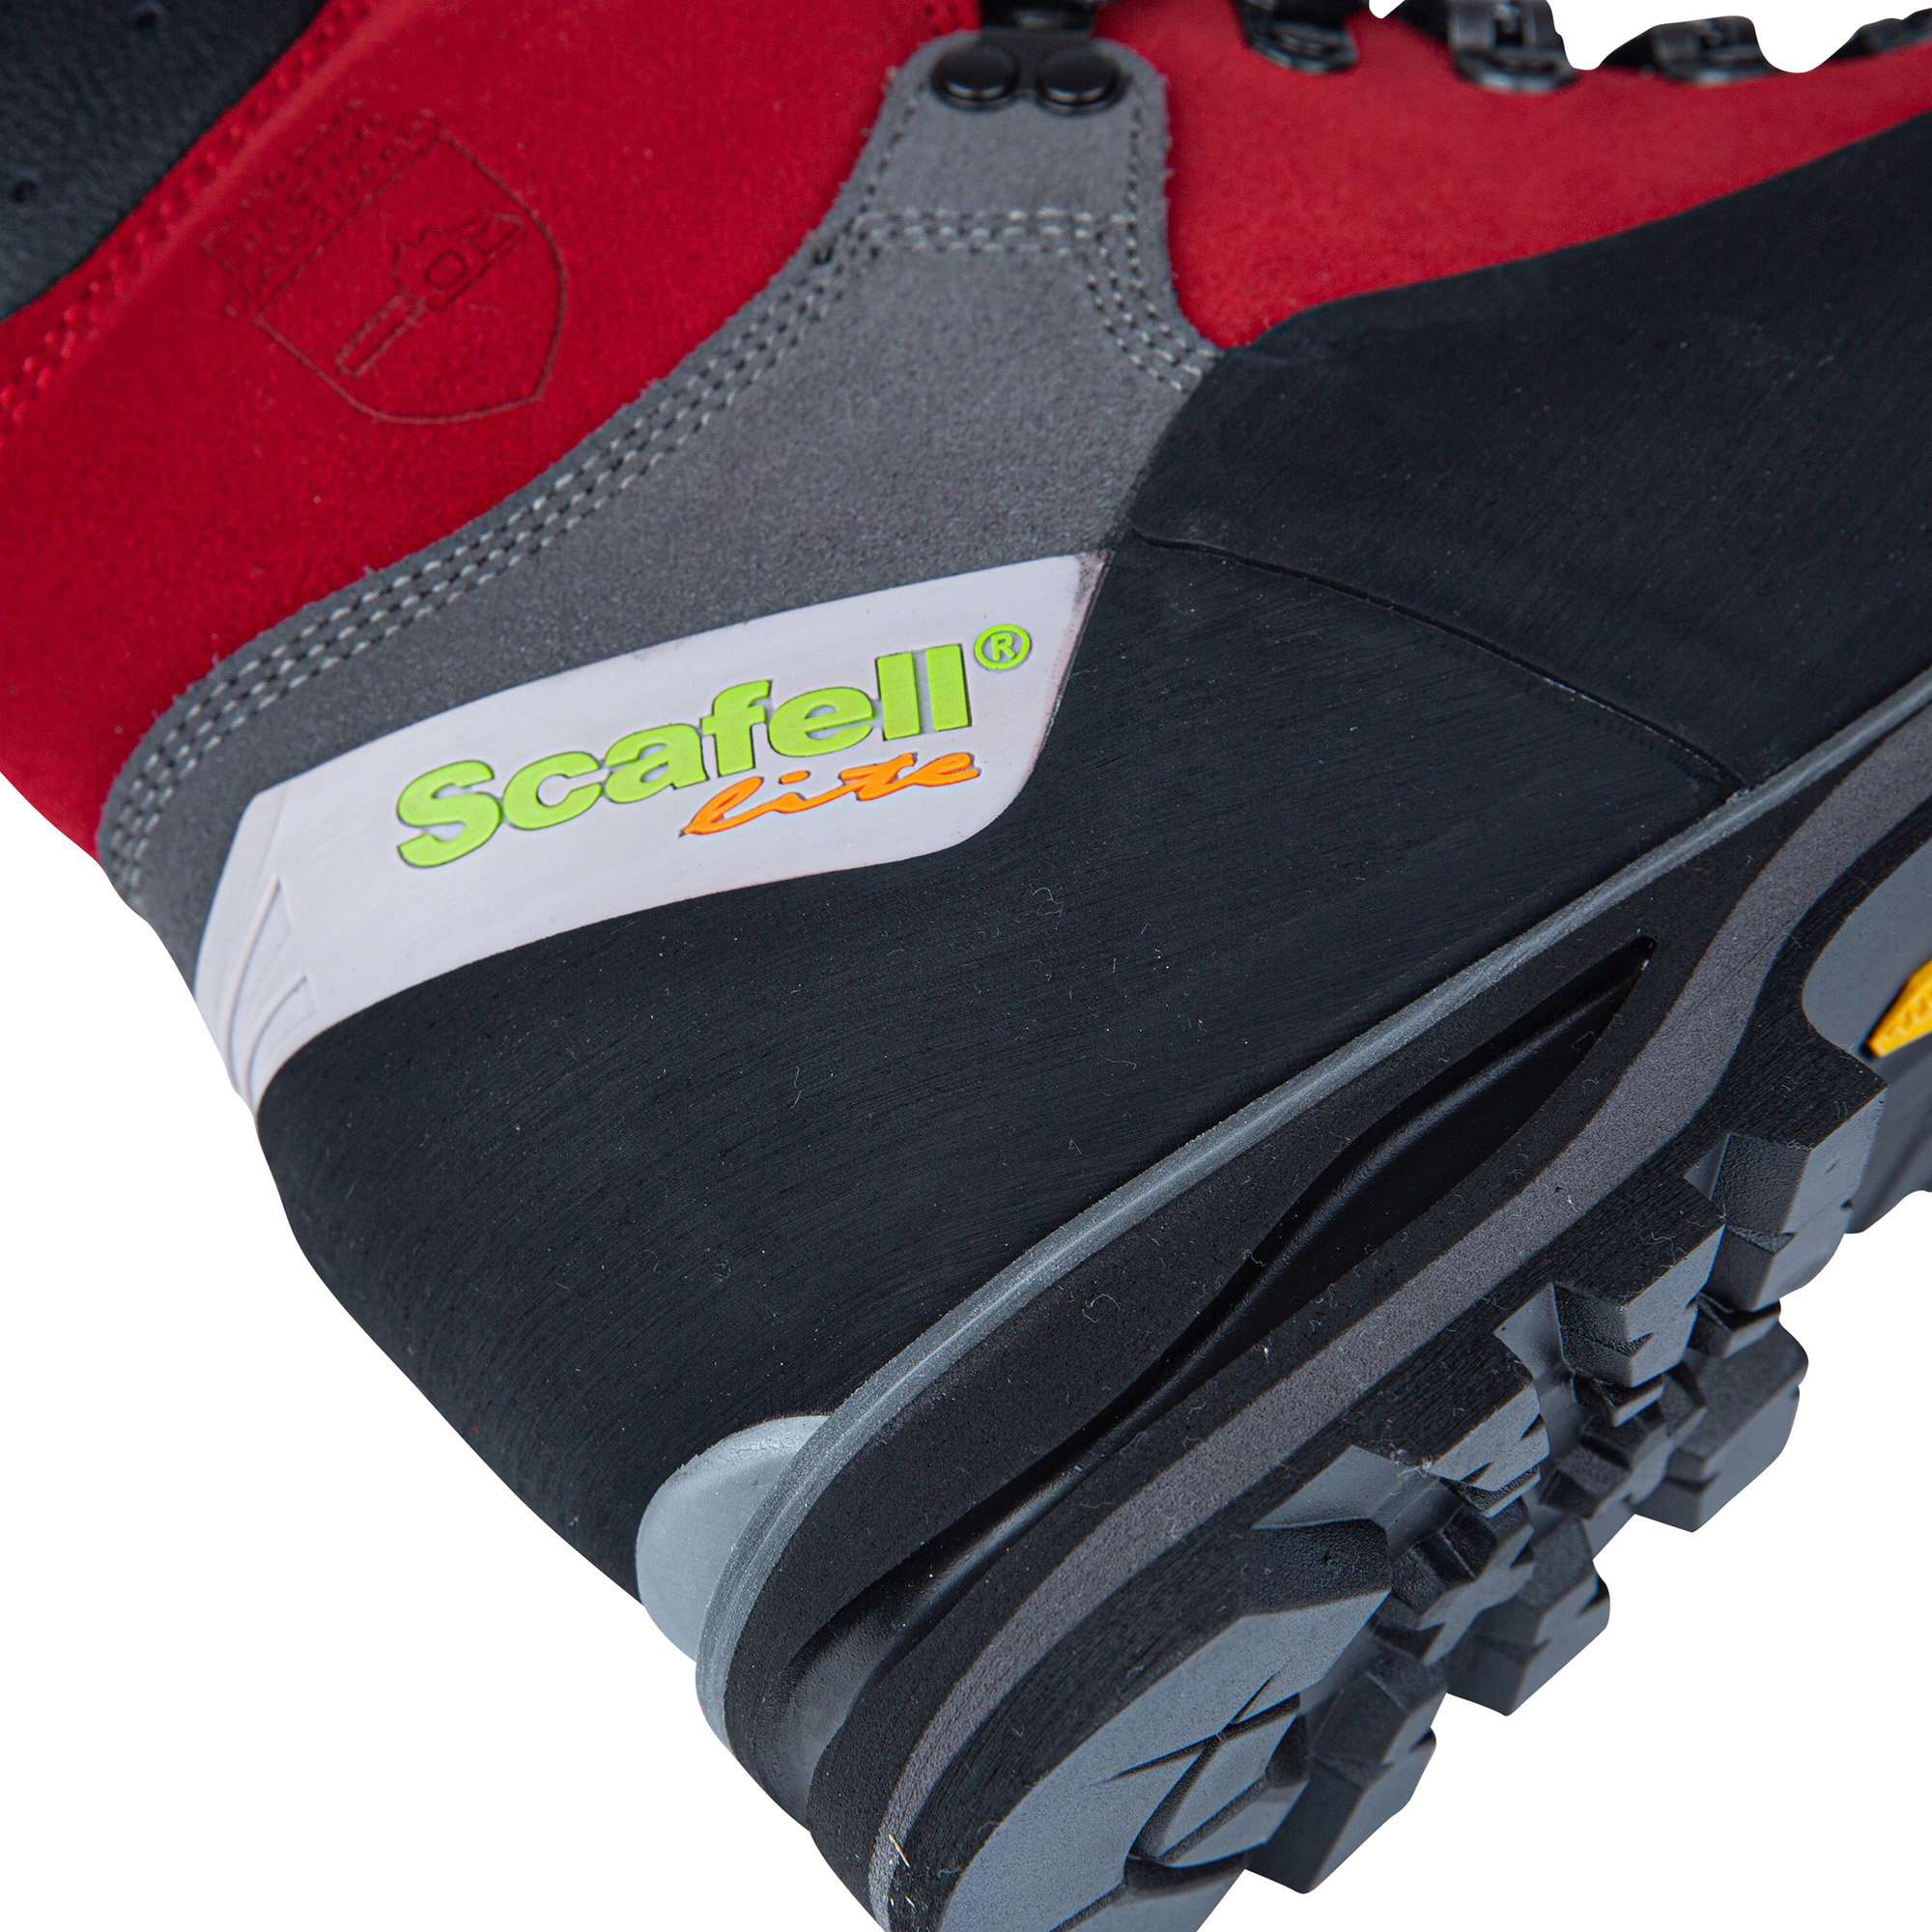 Scafell Lite Class 2 Chainsaw Boot - Red - AT33400 - Arbortec Forestwear